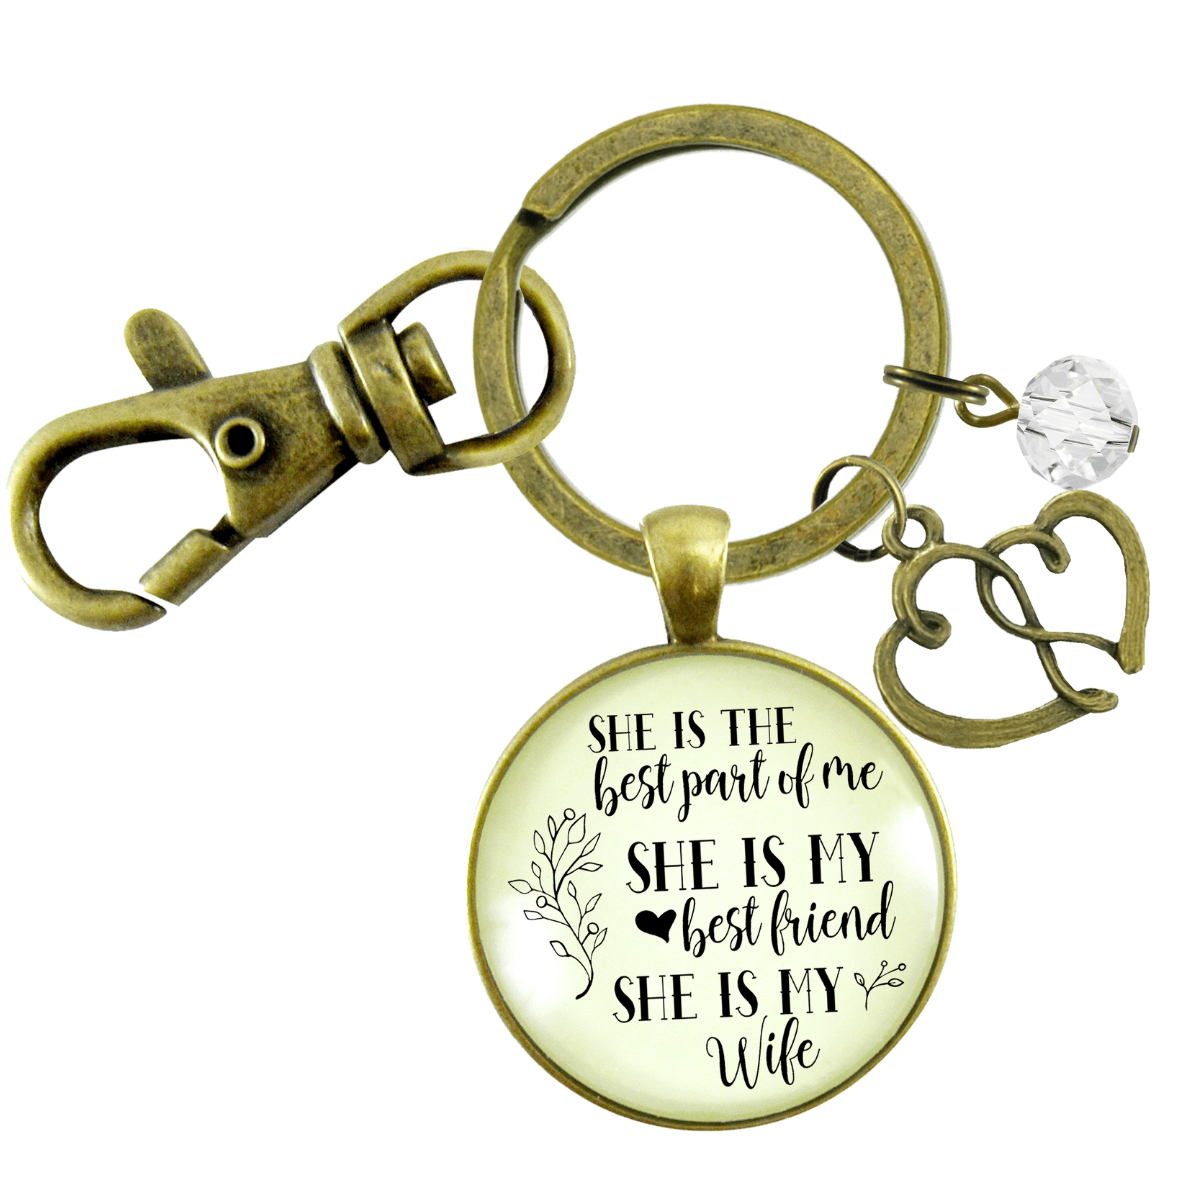 Love My Wife Keychain She Is The Best Part of Me From Husband Wedding Gift Anniversary Jewelry - Gutsy Goodness Handmade Jewelry;Love My Wife Keychain She Is The Best Part Of Me From Husband Wedding Gift Anniversary Jewelry - Gutsy Goodness Handmade Jewelry Gifts